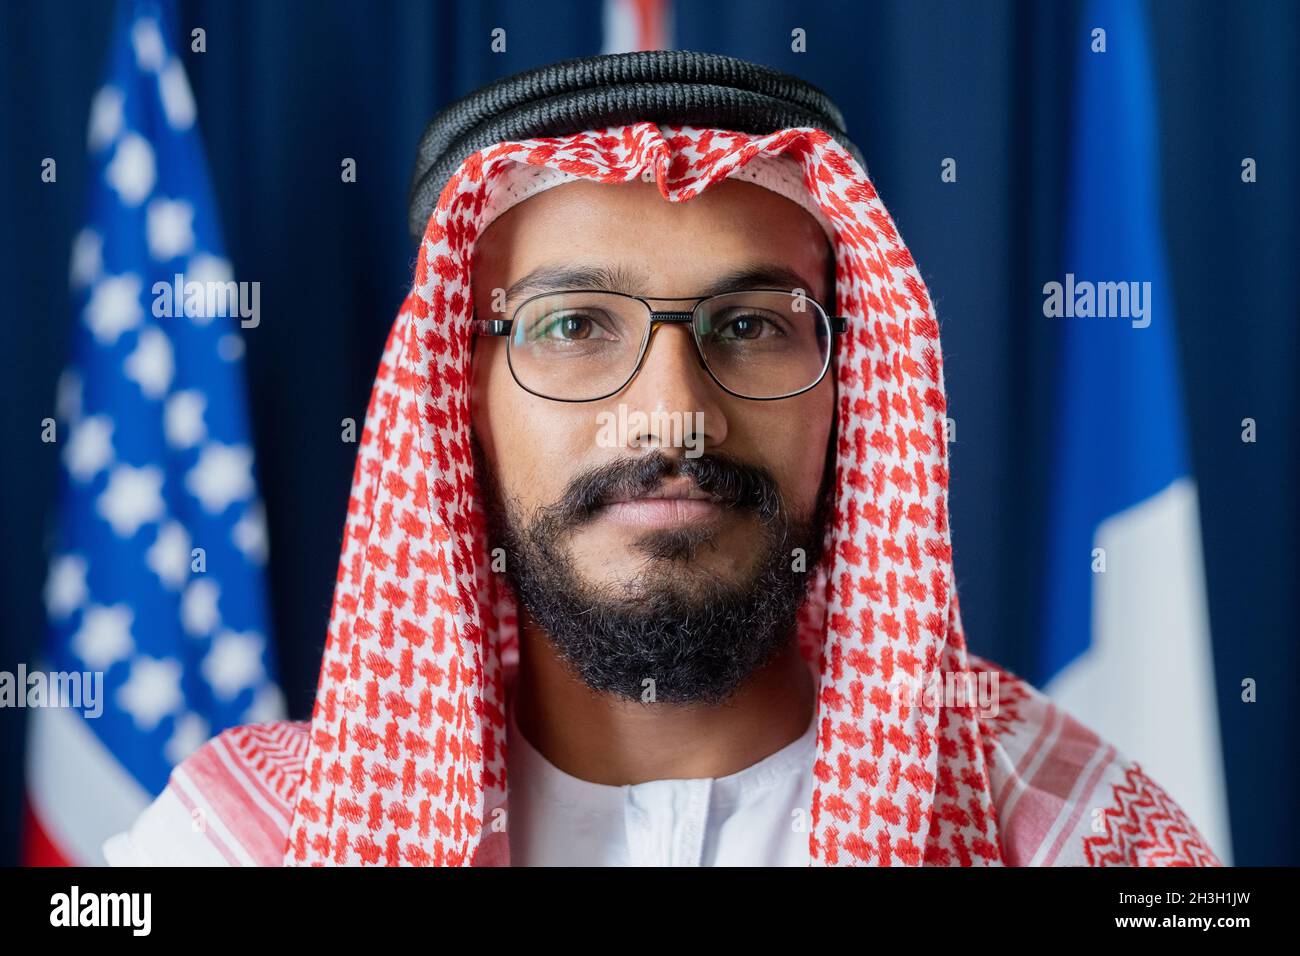 Portrait of serious confident Arabian politician in red and white ghutrah wearing agal and eyeglasses against national flags Stock Photo